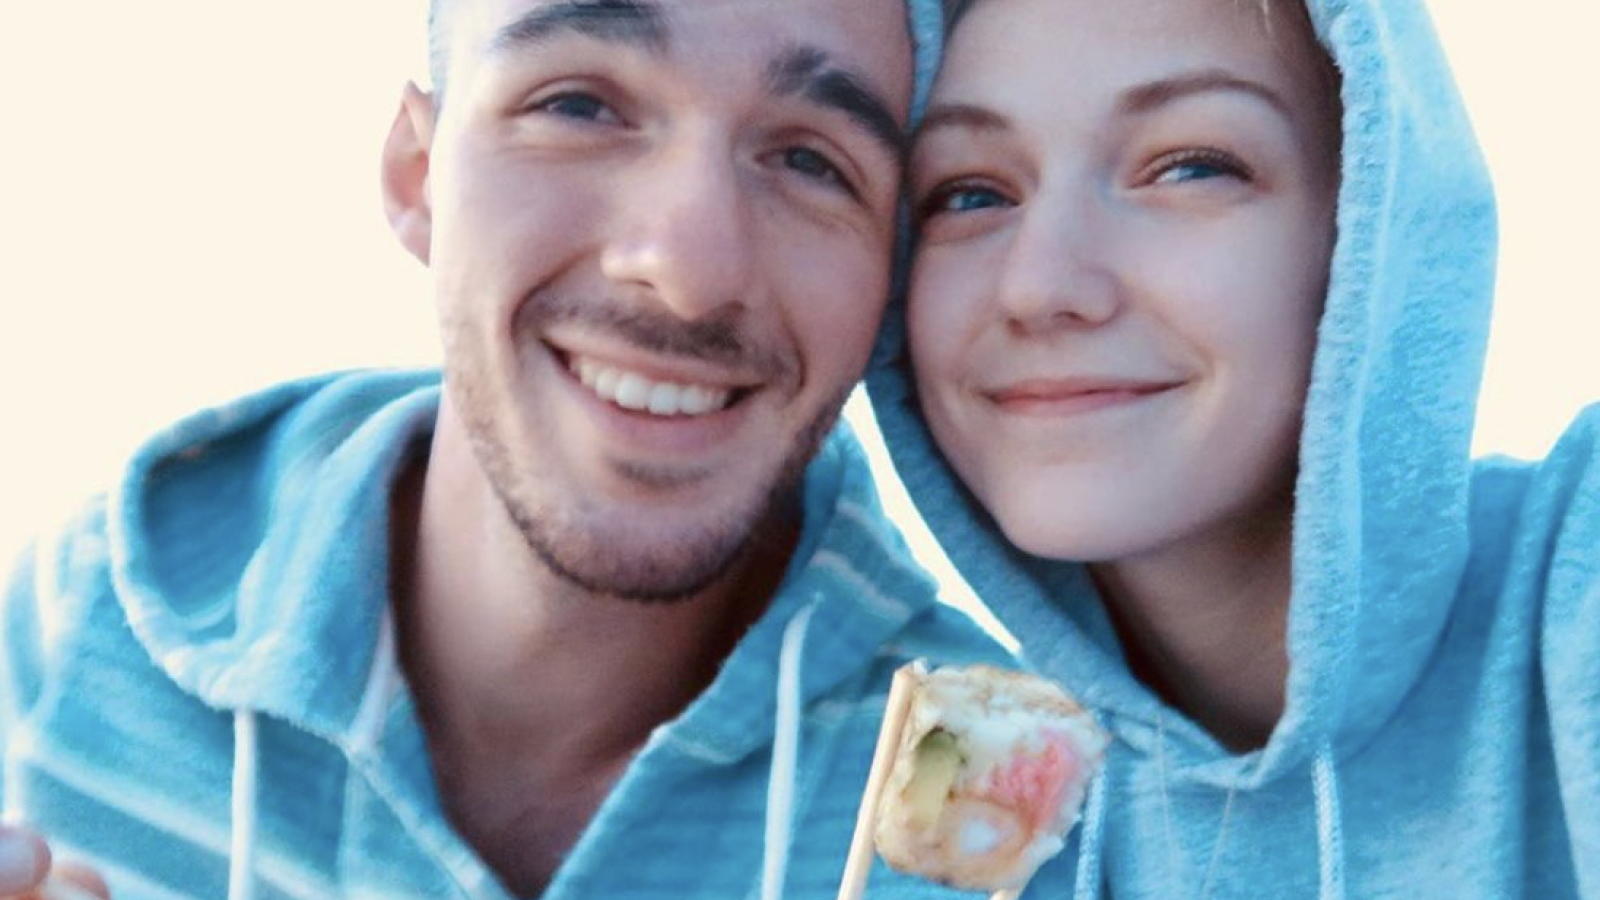 Gabrielle Petito, 22, who was reported missing on September 11, 2021 after traveling with her boyfriend around the country in a van and never returned home, poses for a photo with Brian Laundrie in this undated handout photo.  North Port/Florida Poli